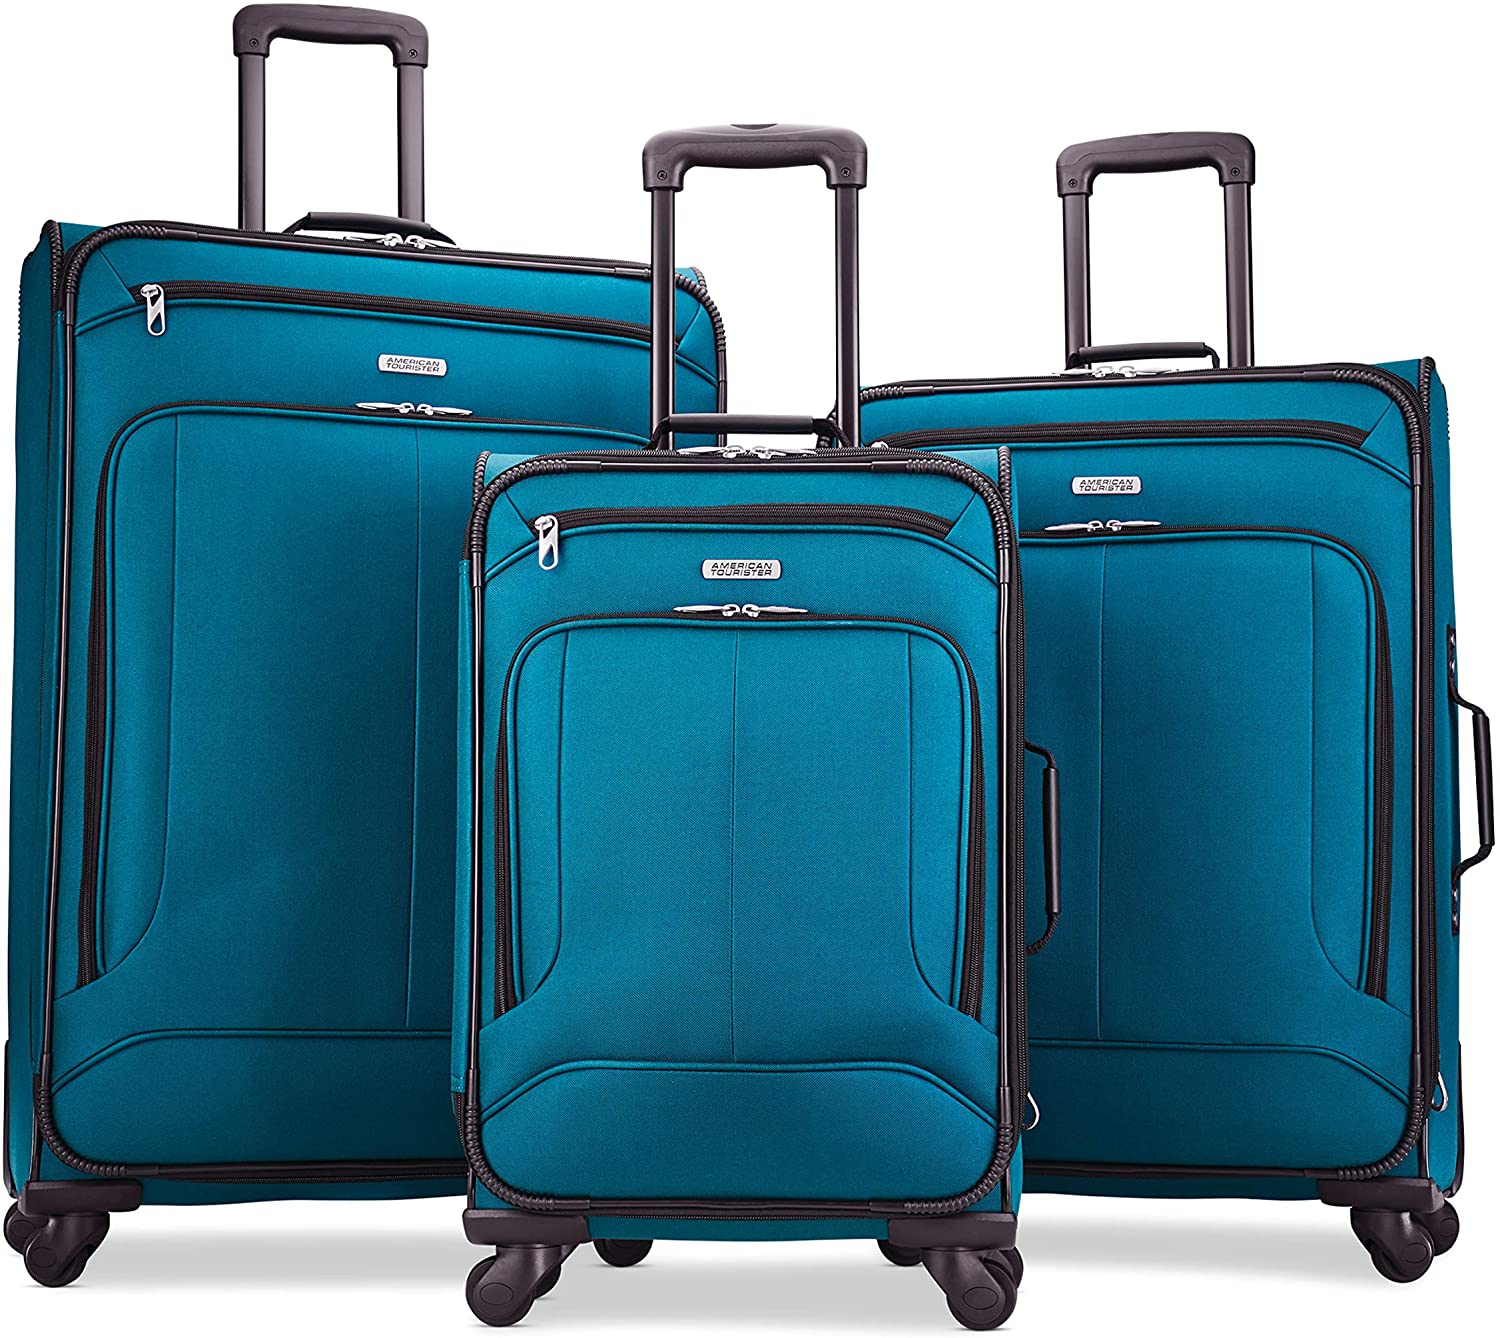 American Tourister 3--Piece (21/25/29) Set Pop Max Softside Luggage with Spinner Wheels (Teal) $145 + free s/h at Amazon